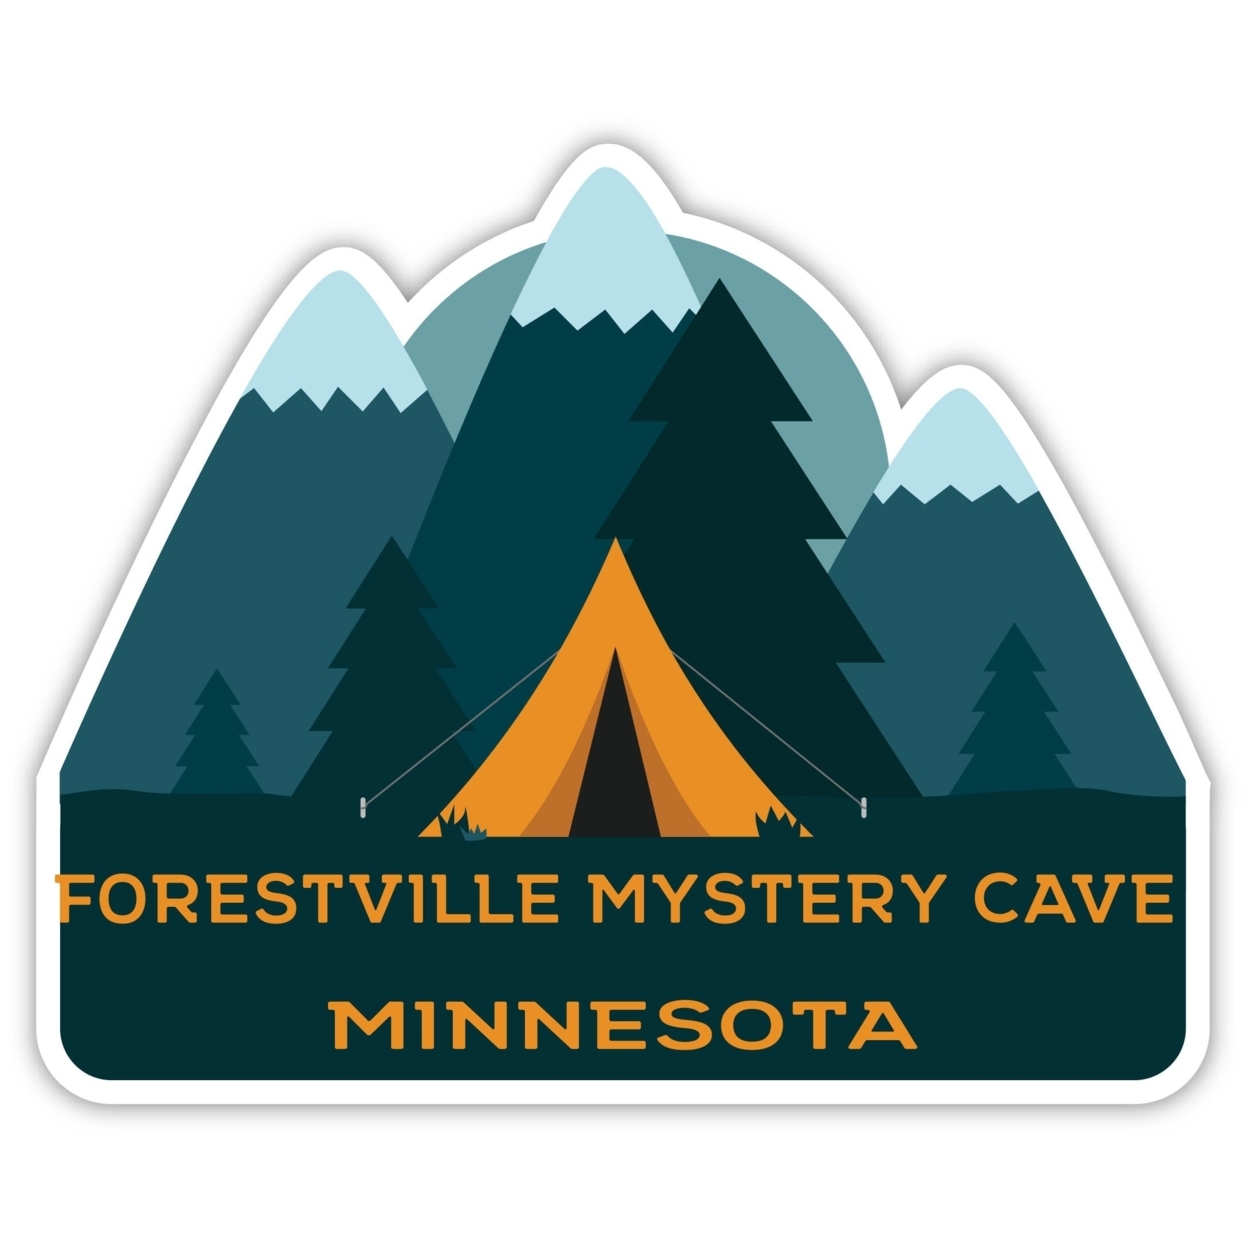 Forestville Mystery Cave Minnesota Souvenir Decorative Stickers (Choose Theme And Size) - 4-Pack, 12-Inch, Tent